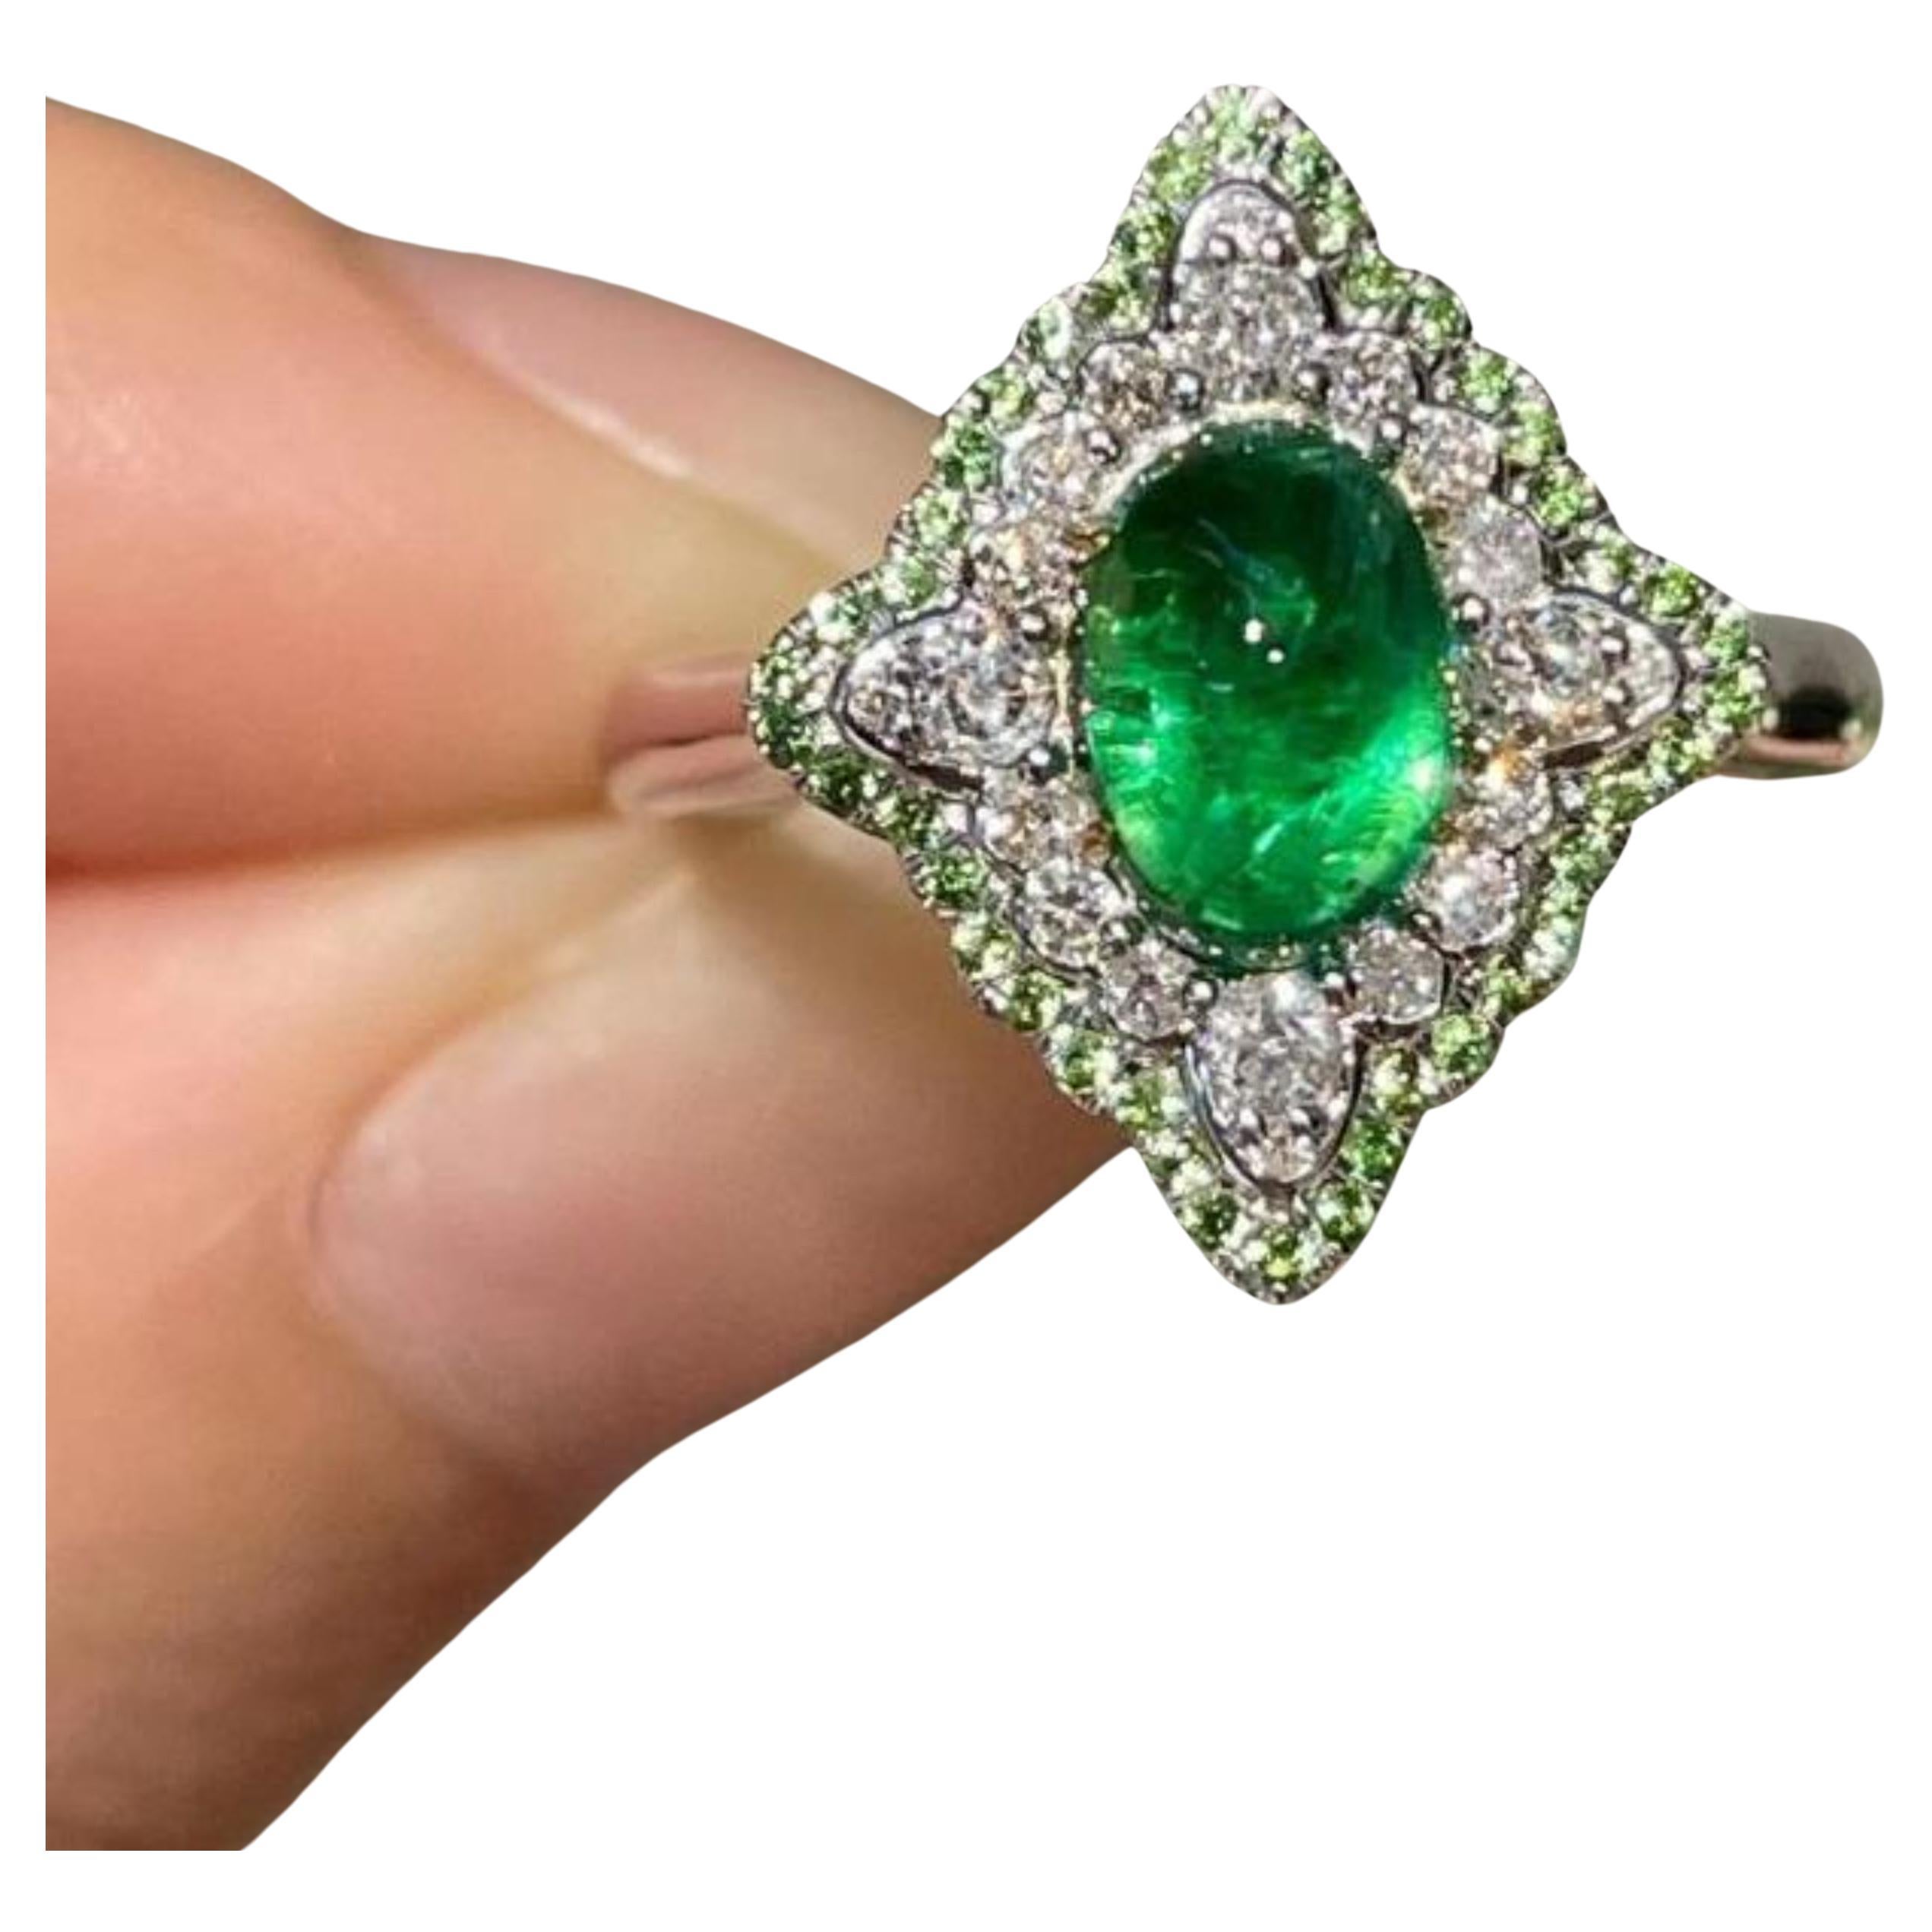 Certified 2 Carat Natural Emerald Diamond Engagement Ring, Unique Cocktail Ring For Sale